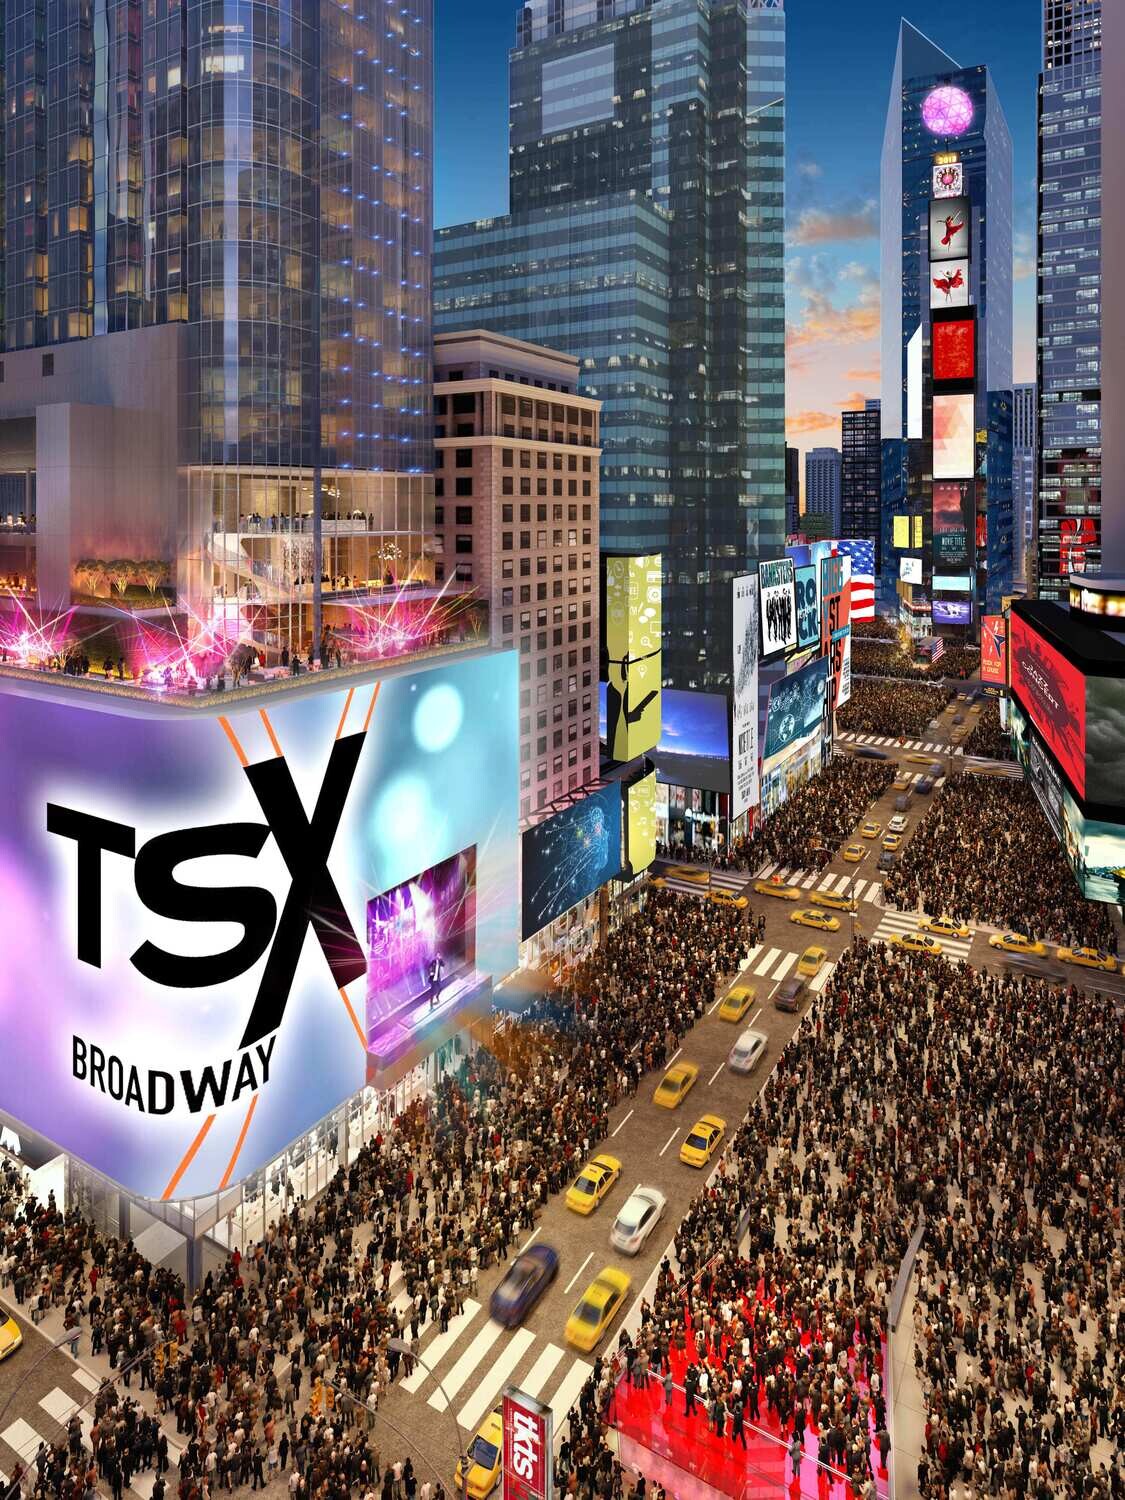 Advertise in Timesquare